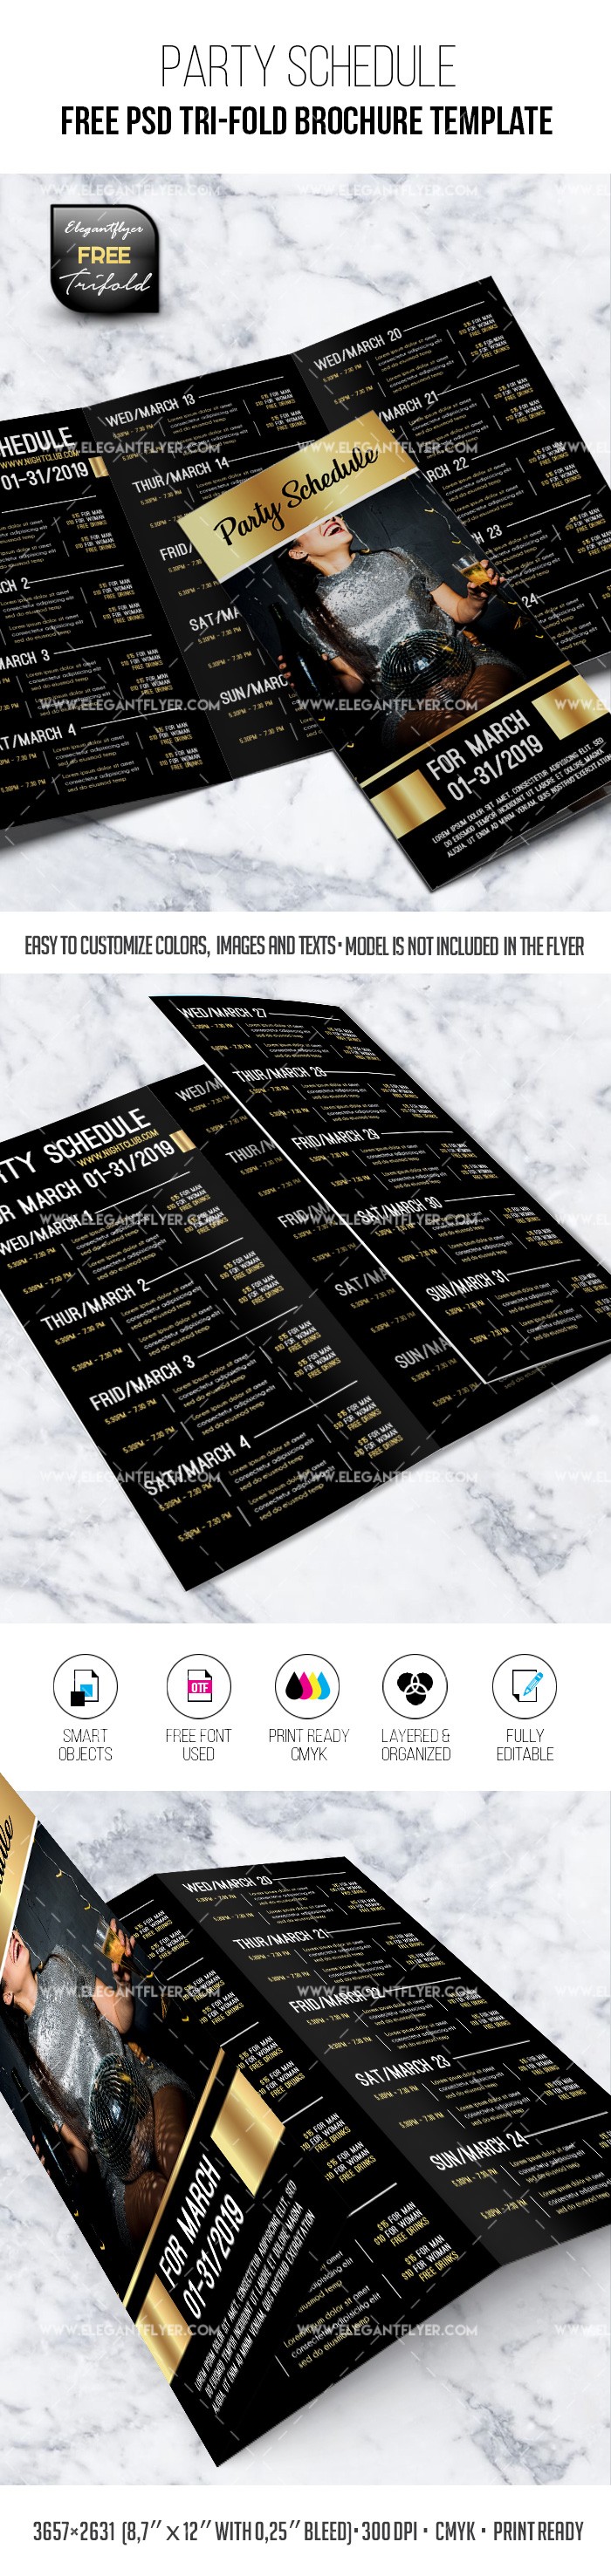 Party Schedule for 1 Month Tri-Fold Brochure by ElegantFlyer